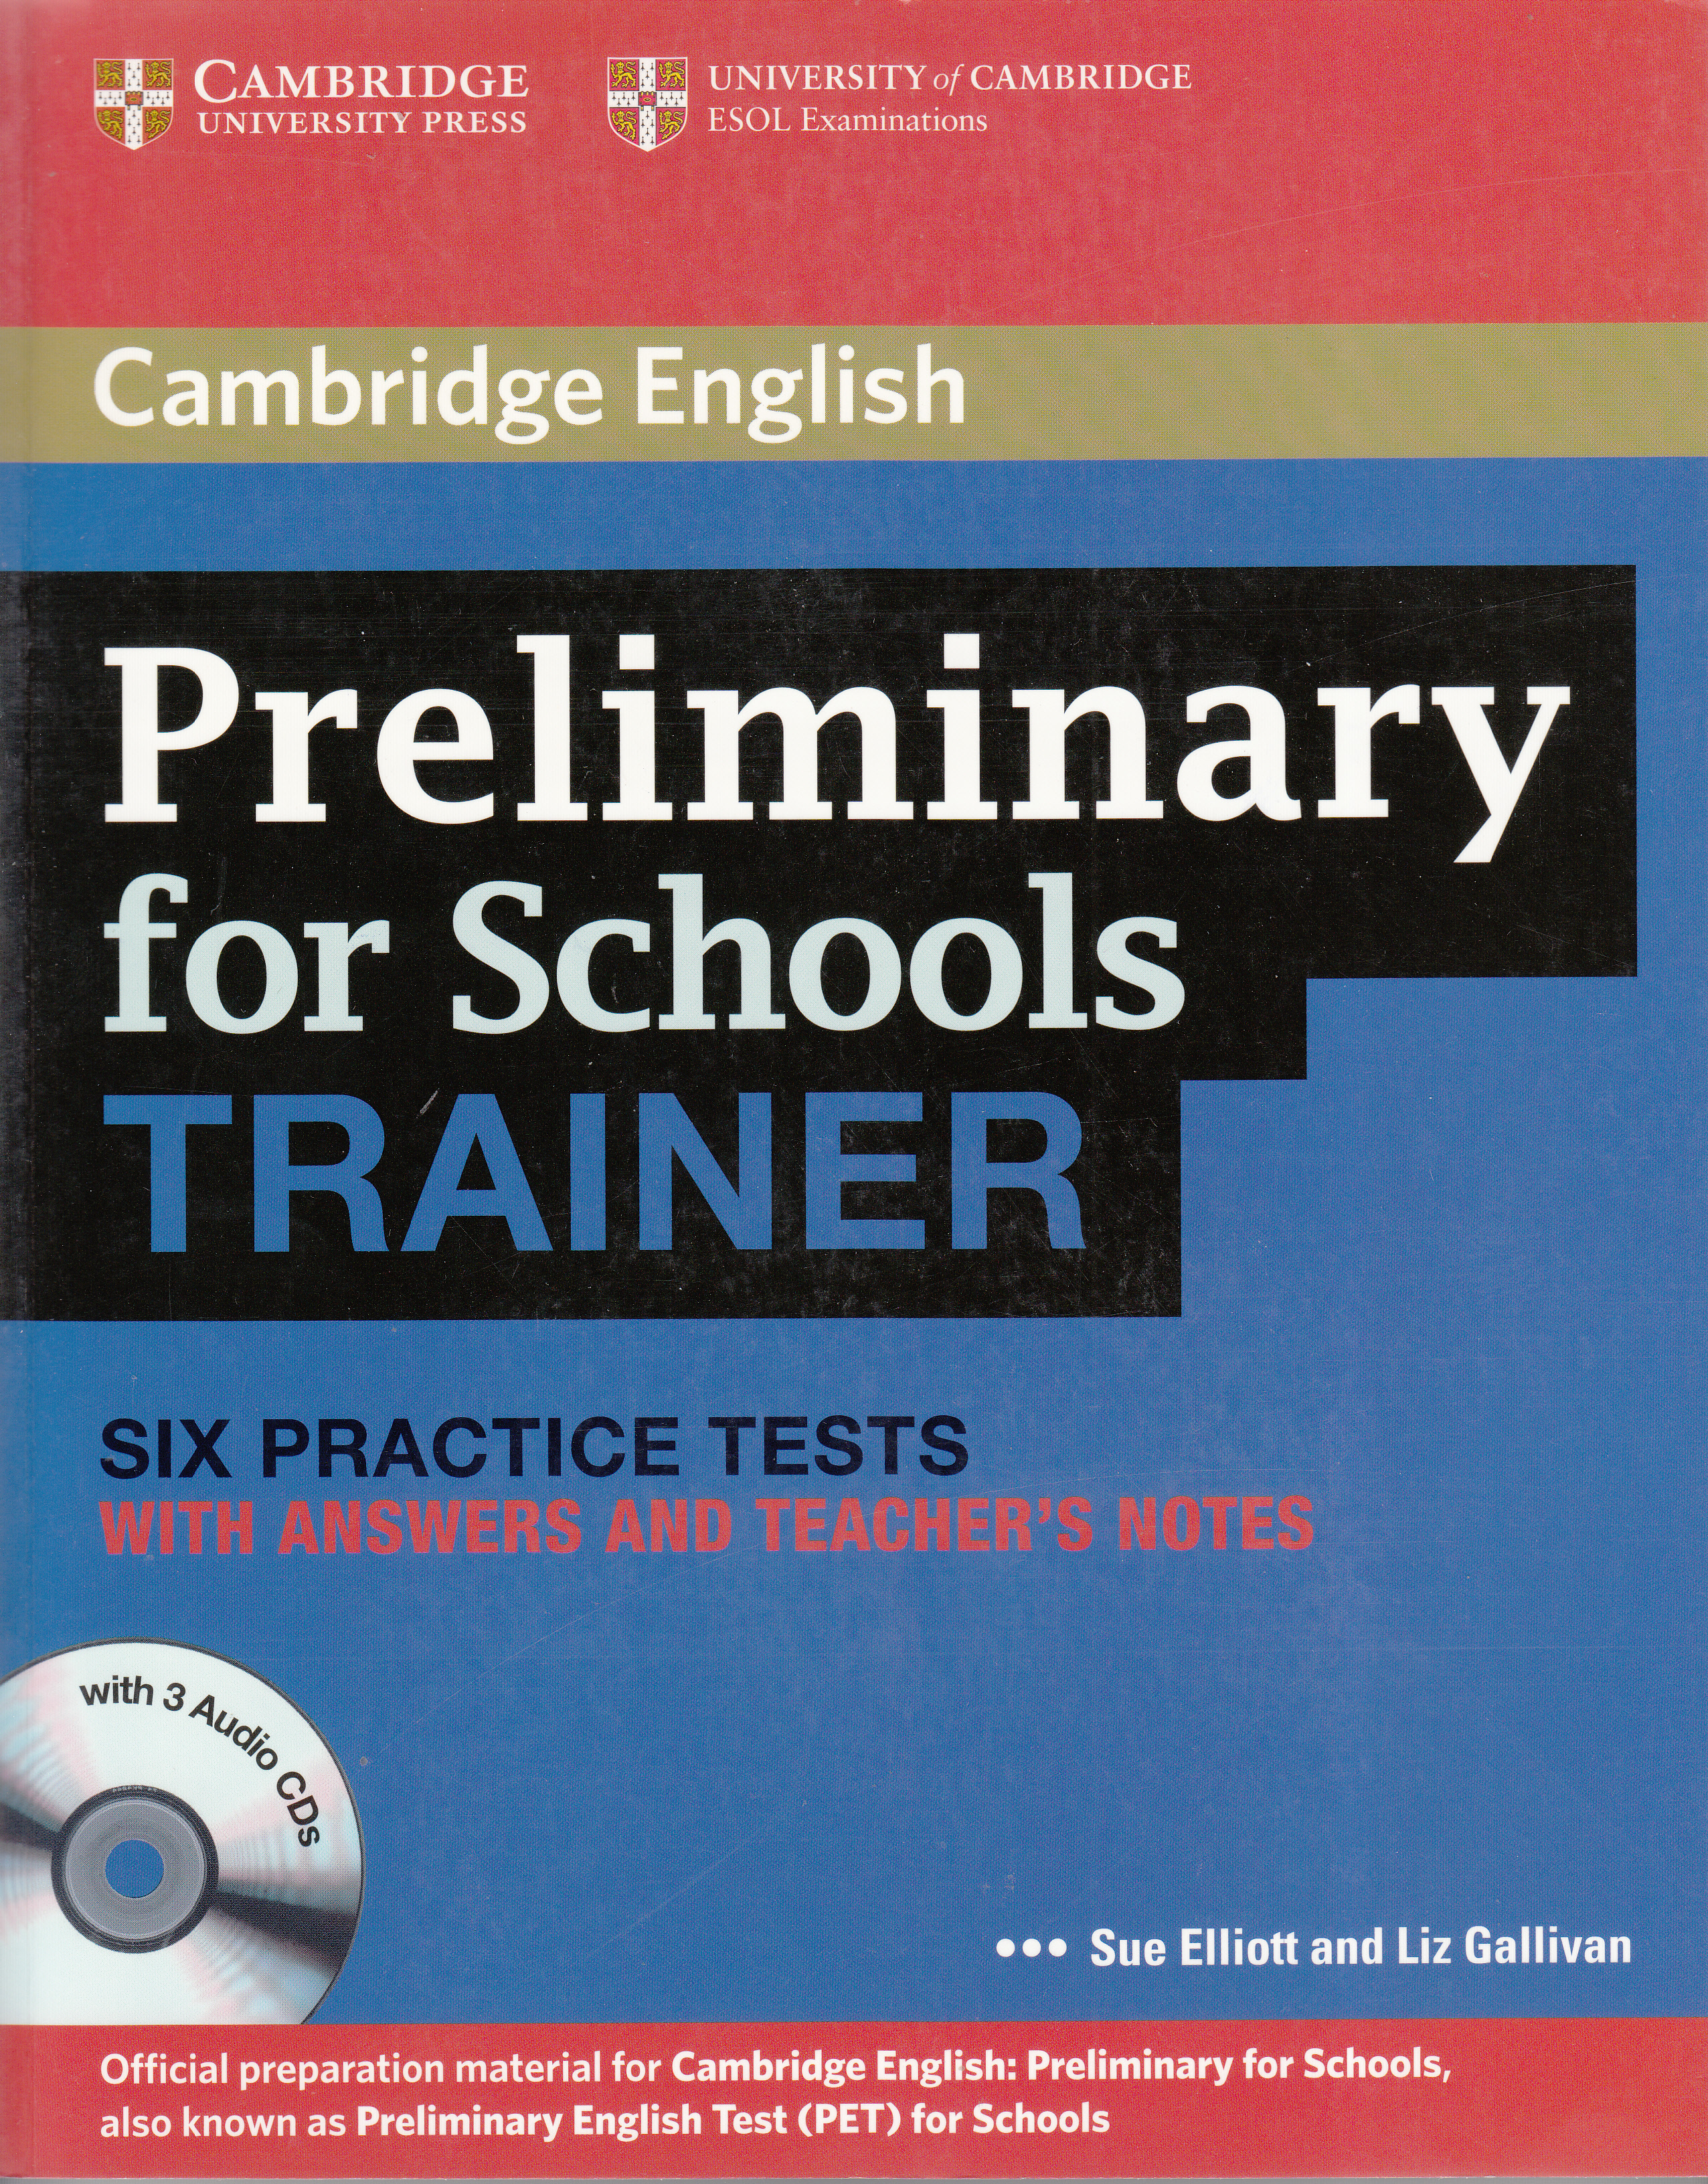 Preliminary english test. Pet for Schools Trainer. Preliminary for Schools Trainer. Cambridge preliminary English Test for Schools. Cambridge Exams Pet for Schools.